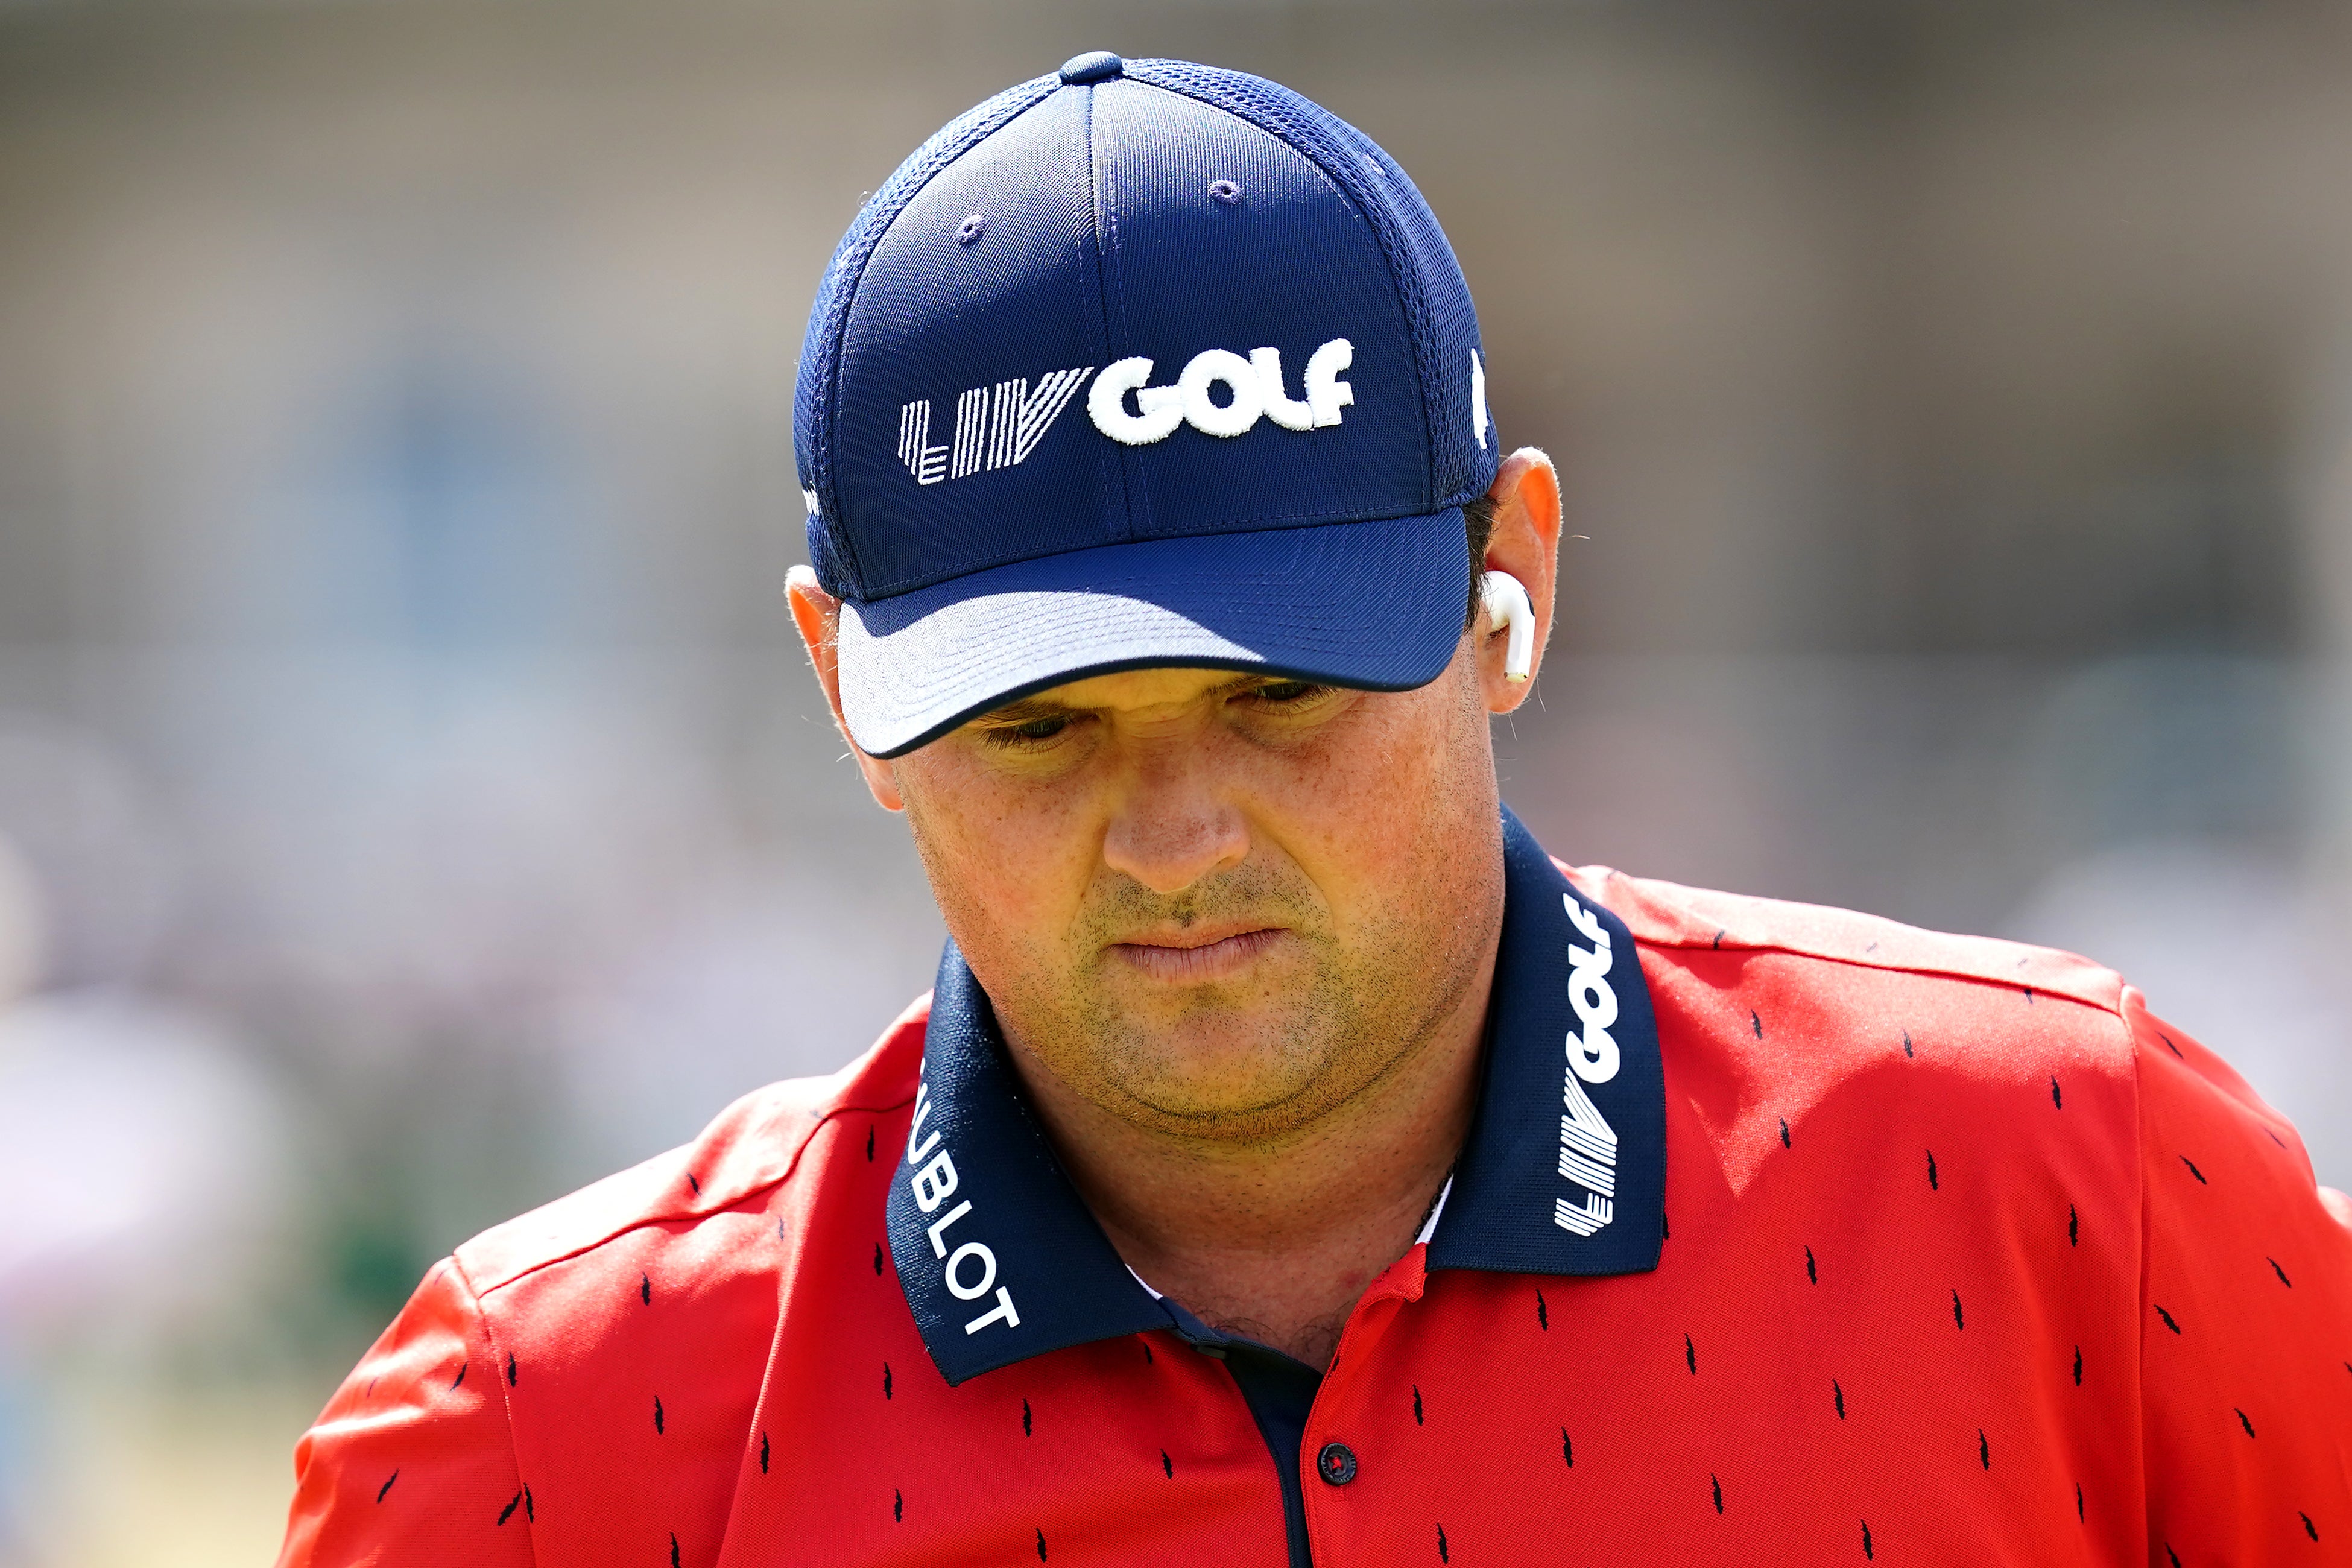 Patrick Reed wearing LIV Golf branded clothing during practice ahead of the 150th Open (David Davies/PA)